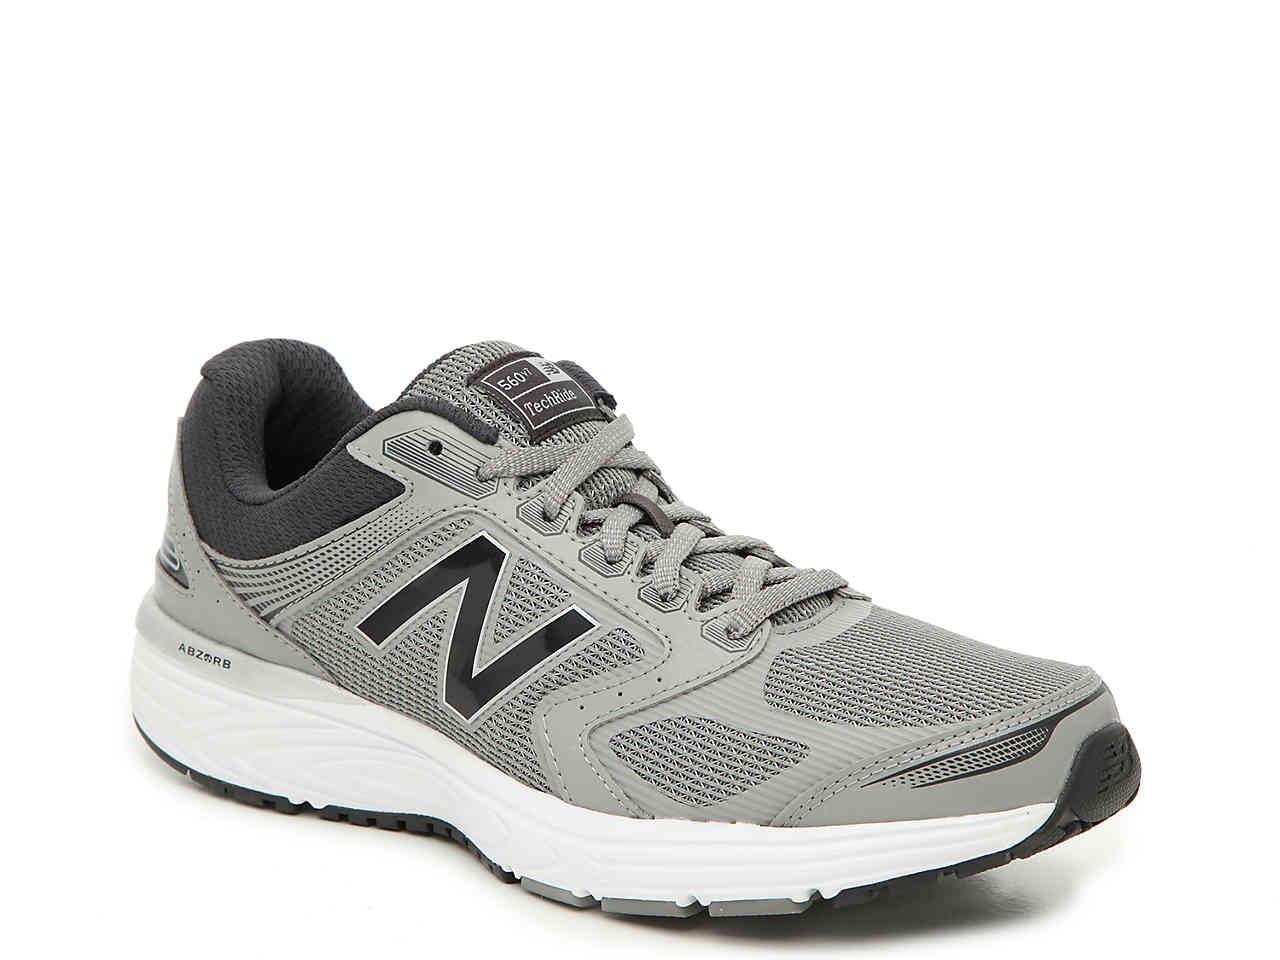 New Balance Synthetic 560 V7 Running Shoe in Grey (Gray) for Men - Save 55%  | Lyst